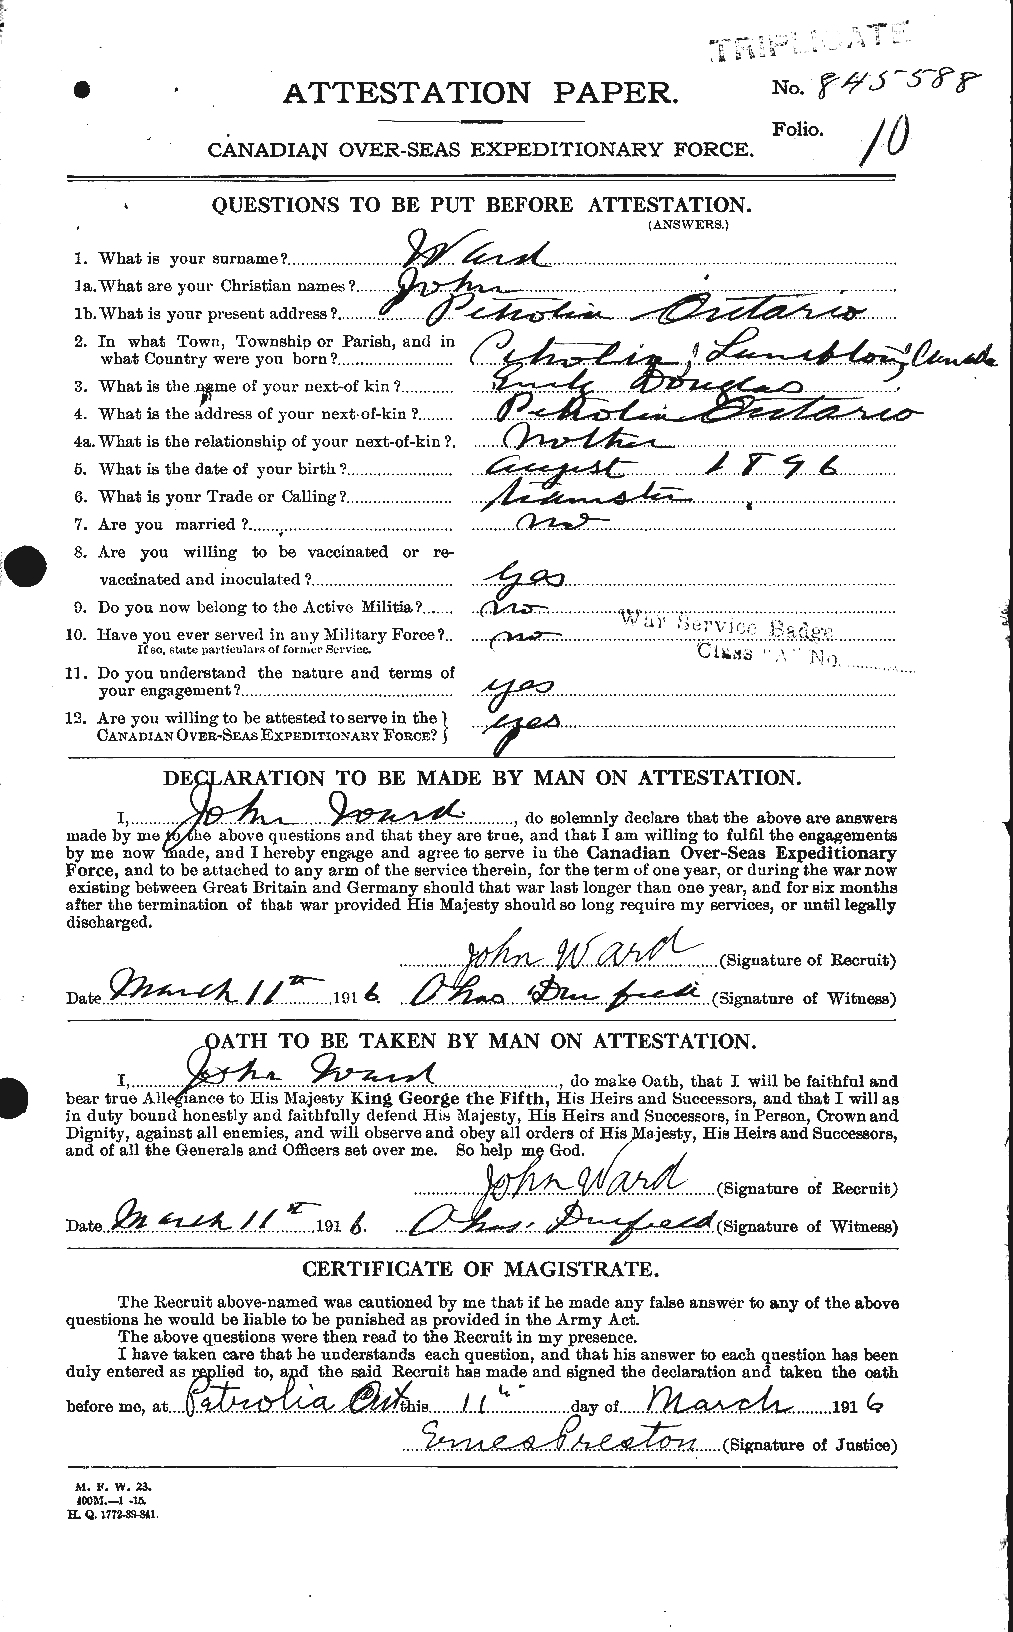 Personnel Records of the First World War - CEF 659498a